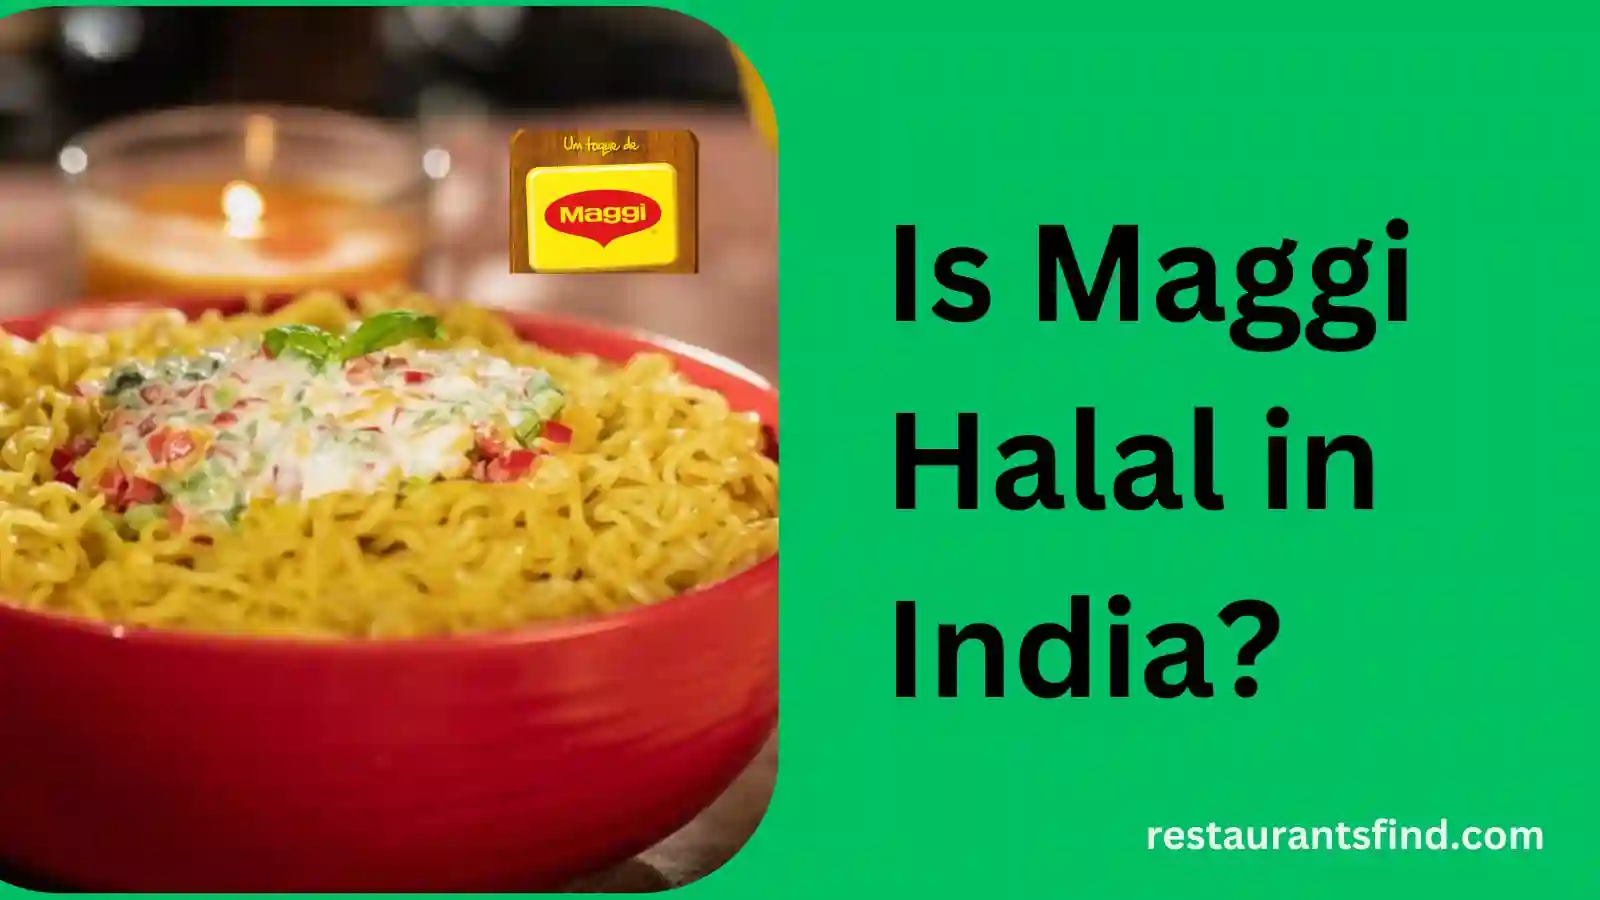 Is Maggi Halal in India